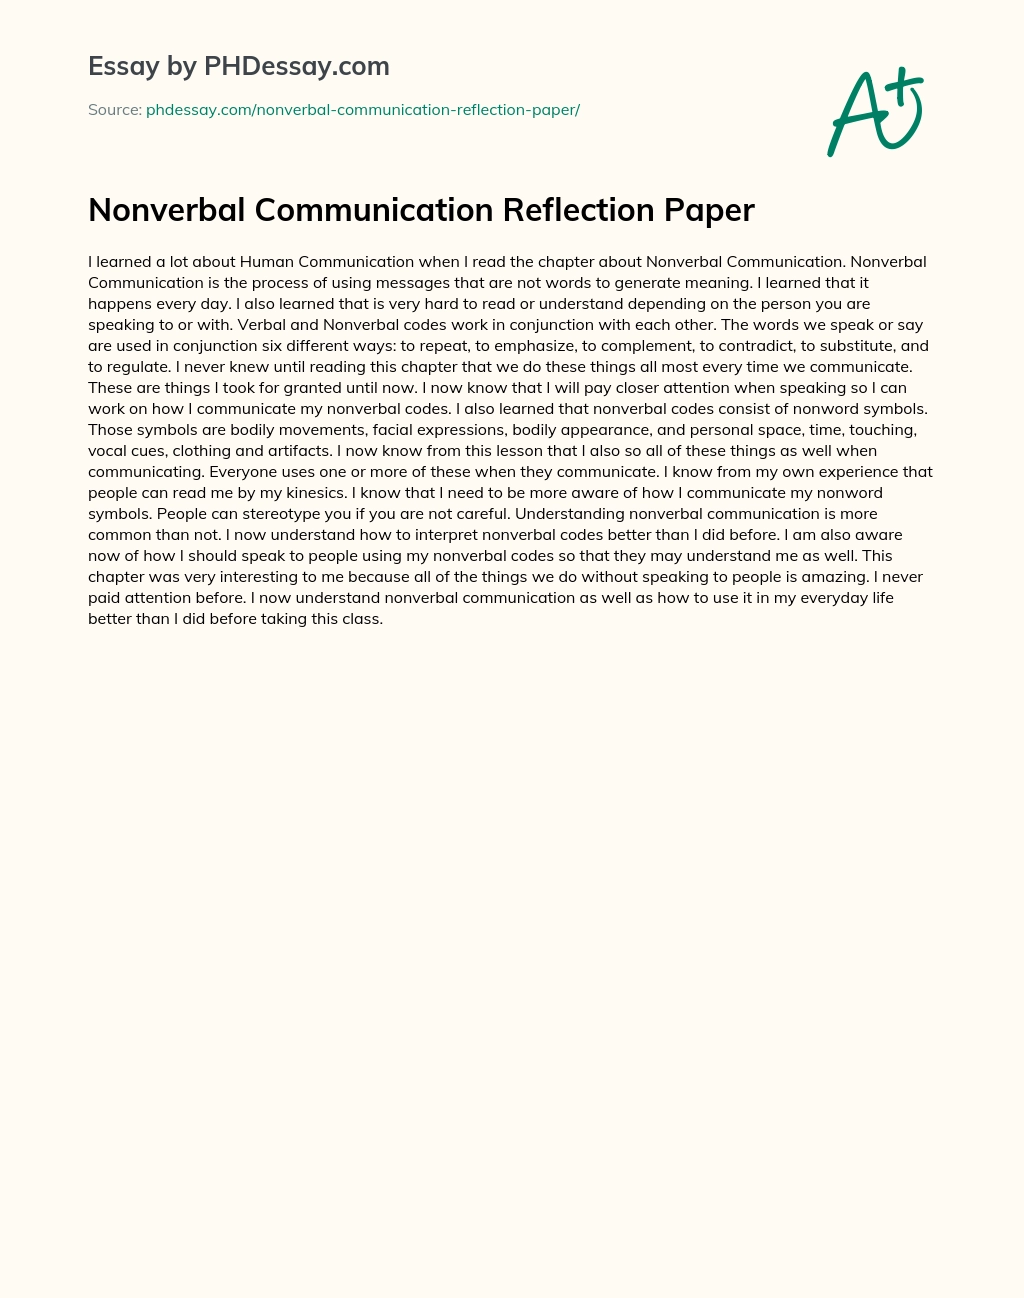 Nonverbal Communication Reflection Paper essay